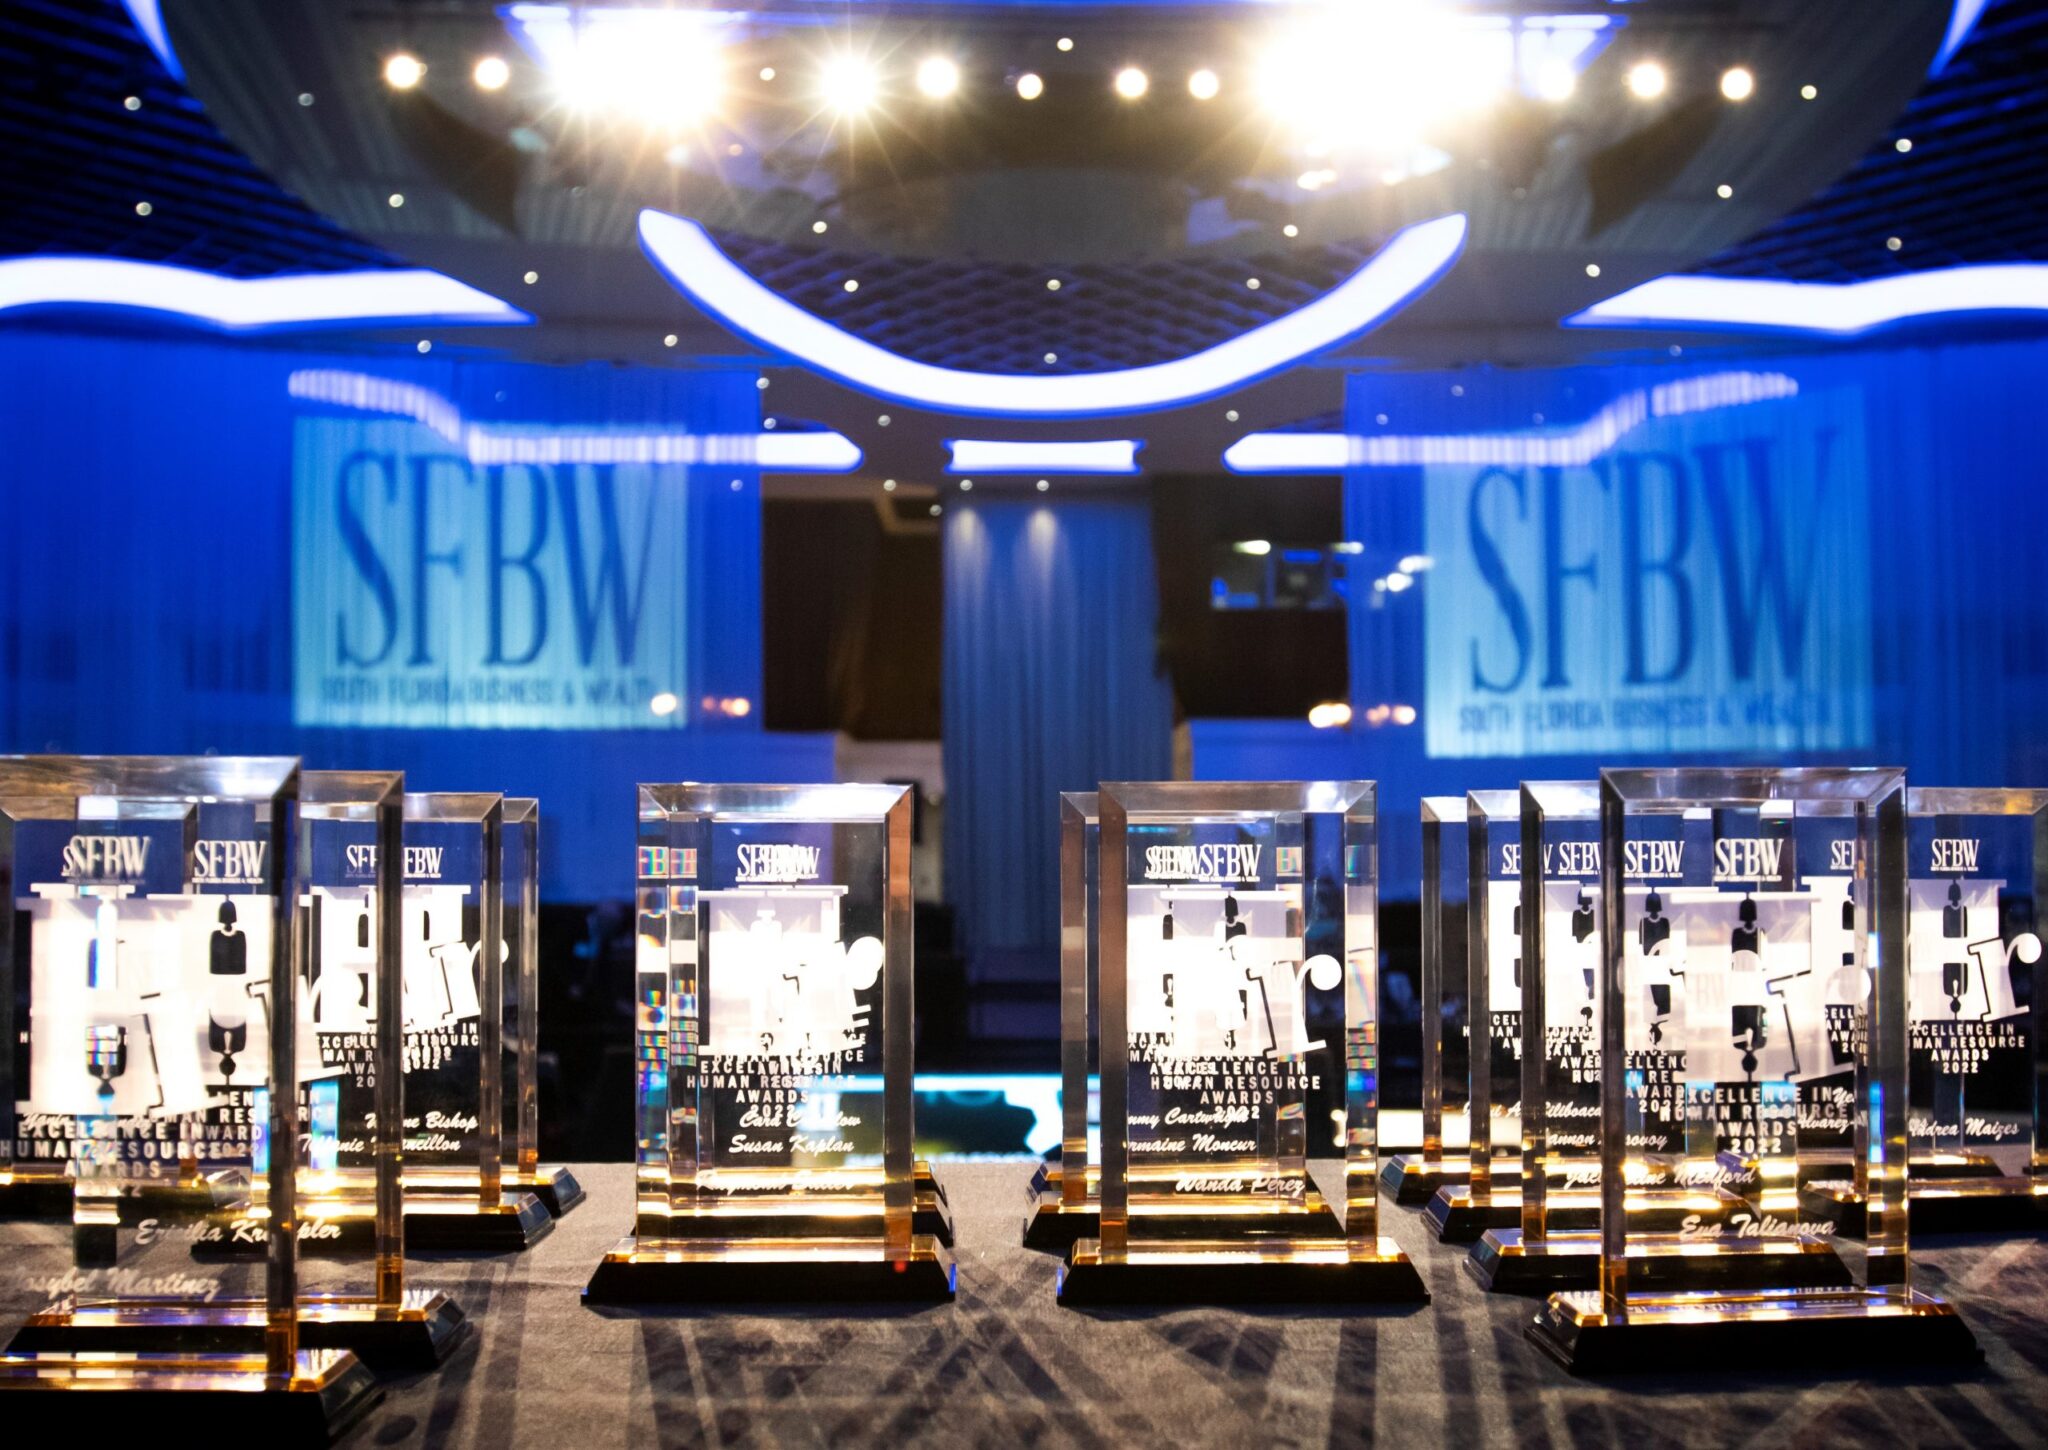 Nominations Remain Open for SFBW's Human Resources Awards! S. Florida